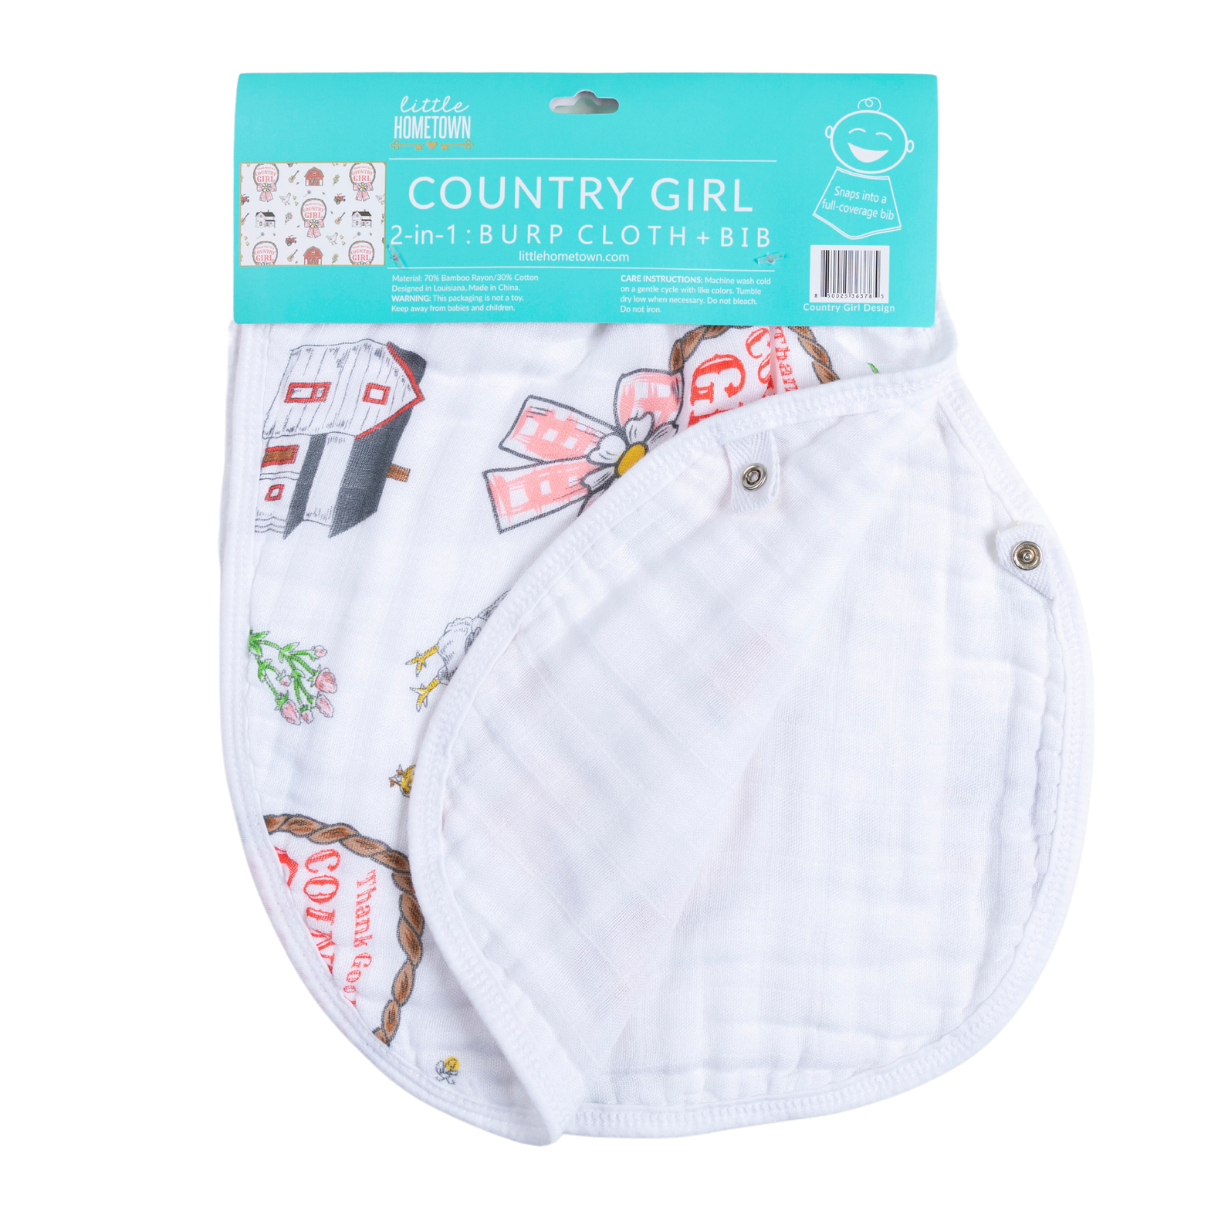 Country Girl 2 in 1 Burp Cloth and Bib Combo